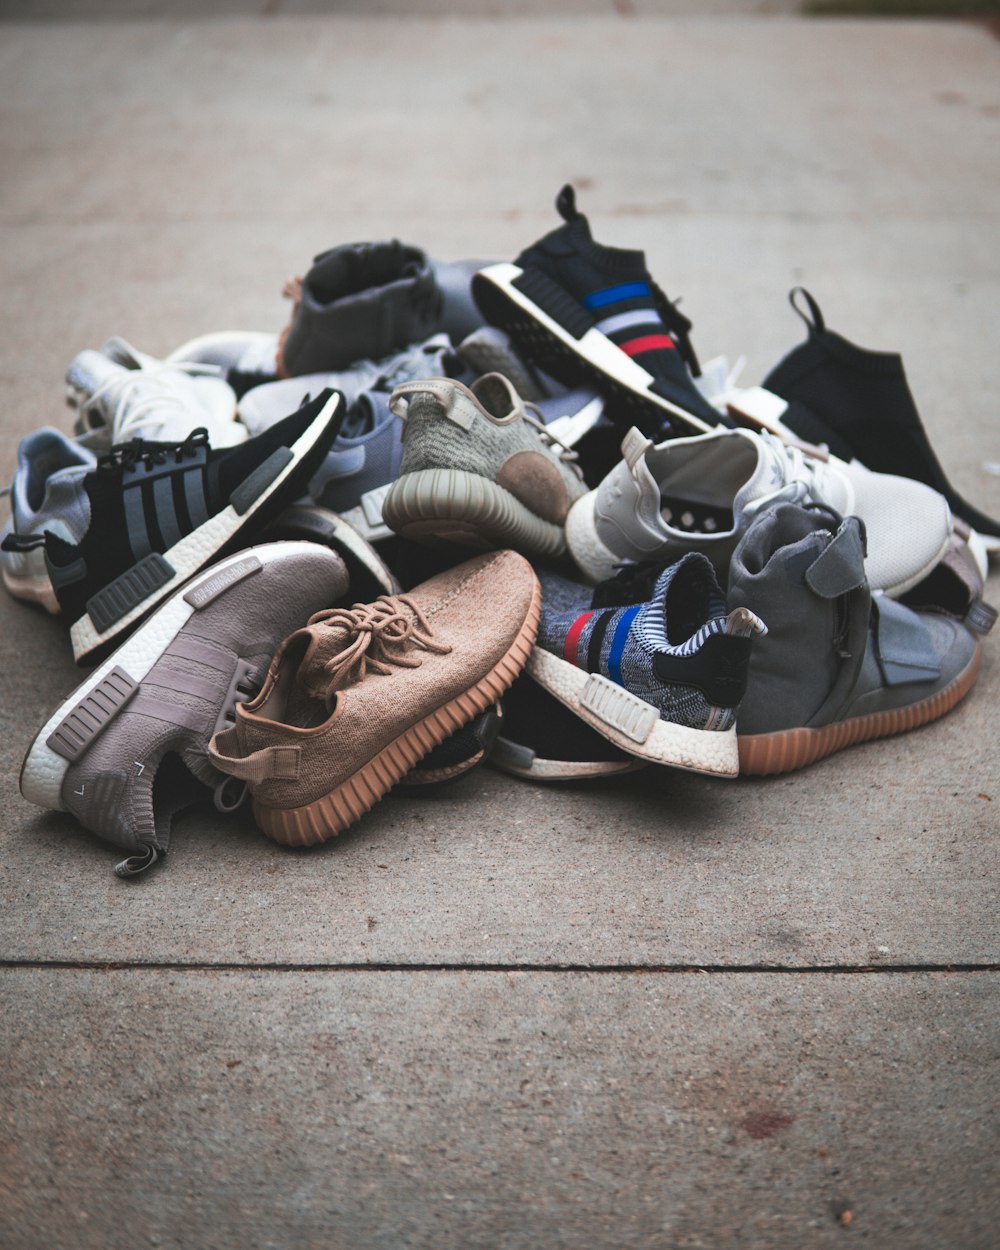 adidas sneakers on wooden surface photo – Free Footwear Image on Unsplash